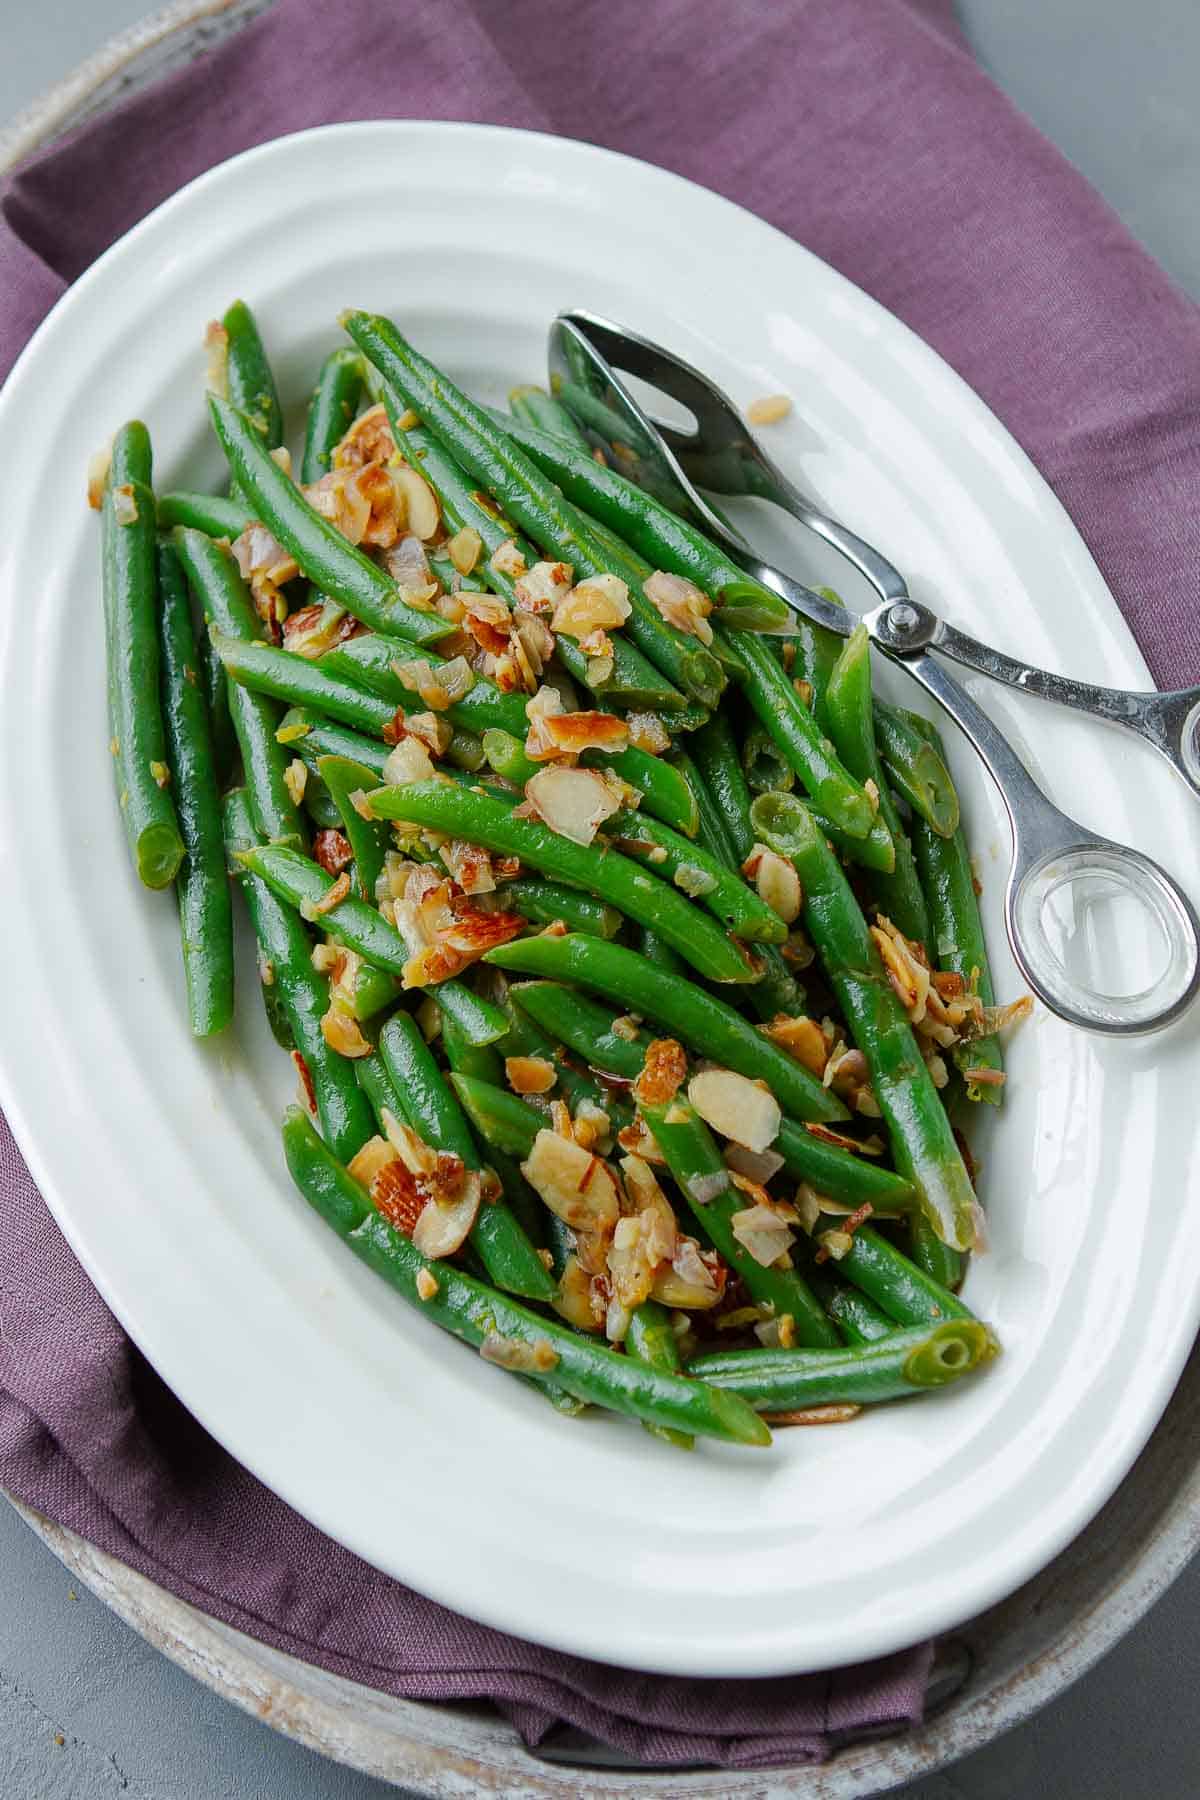 Green beans almondine is a fantastic alternative to green bean casserole. The simple flavors in this easy side dish allow the fresh flavor of the green beans shine! | Easy | Recipe | Thanksgiving | Healthy | Without butter | Dairy-free | Vegan | Plant Based | WFPB